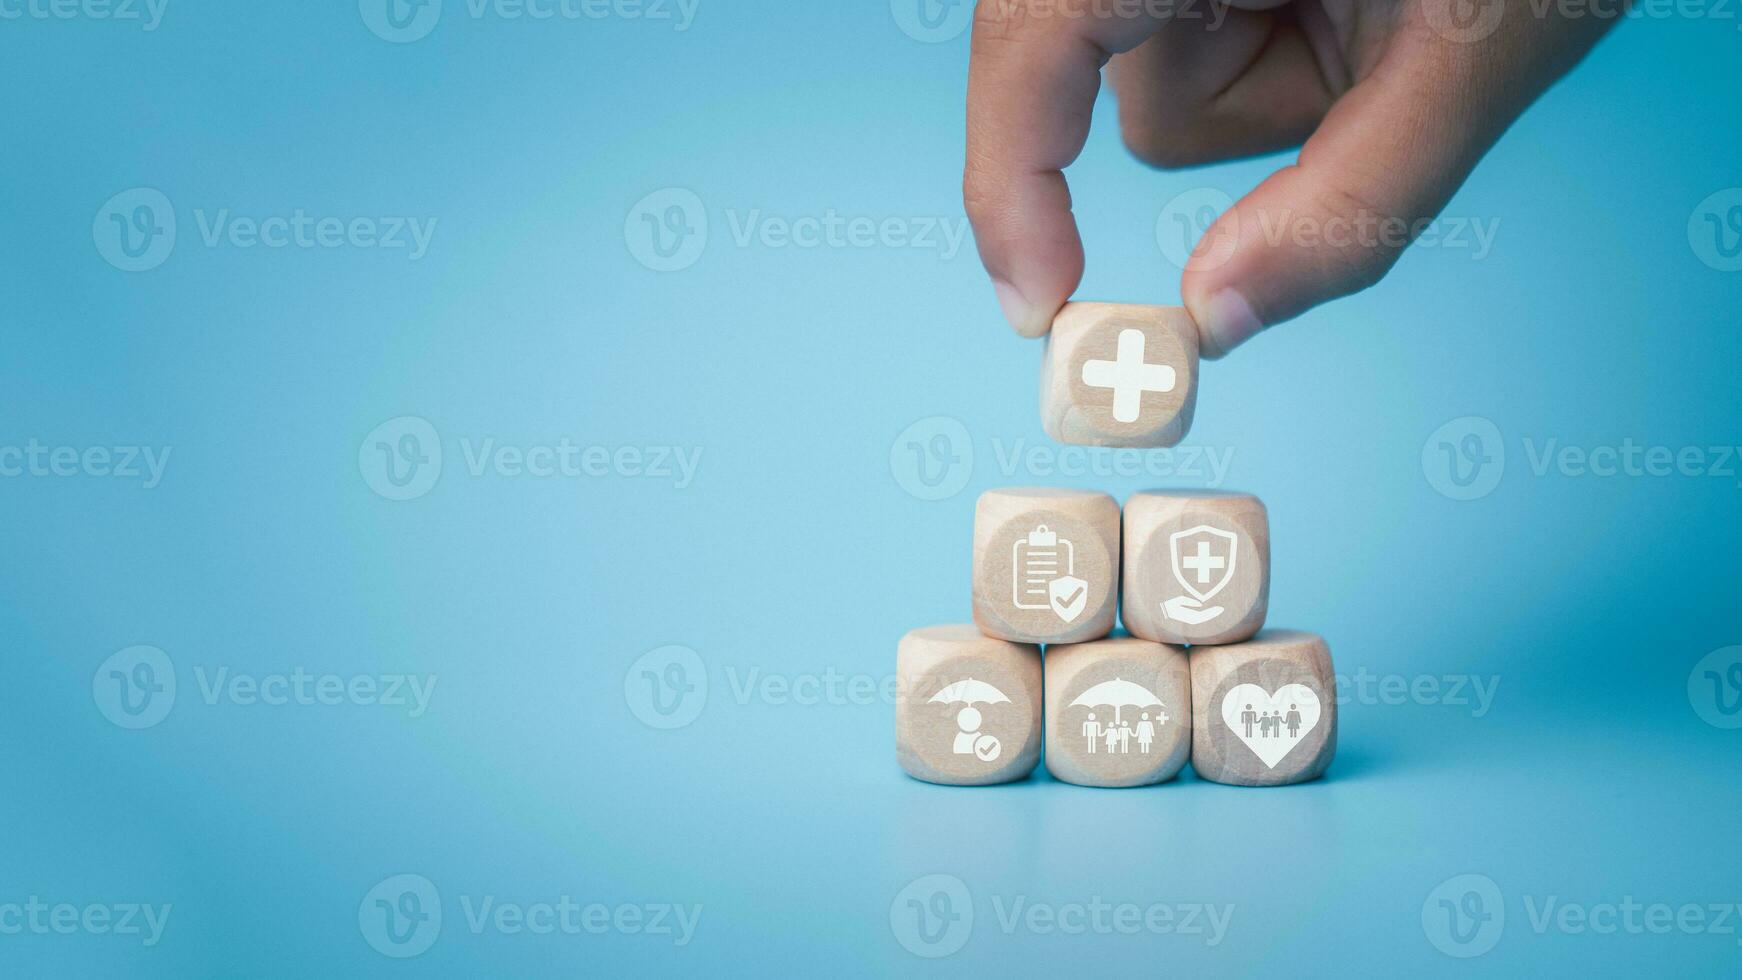 Health insurance and healthcare concept, human hand holds wooden block with icons about health insurance and healthcare access, retirement planning on blue background. photo